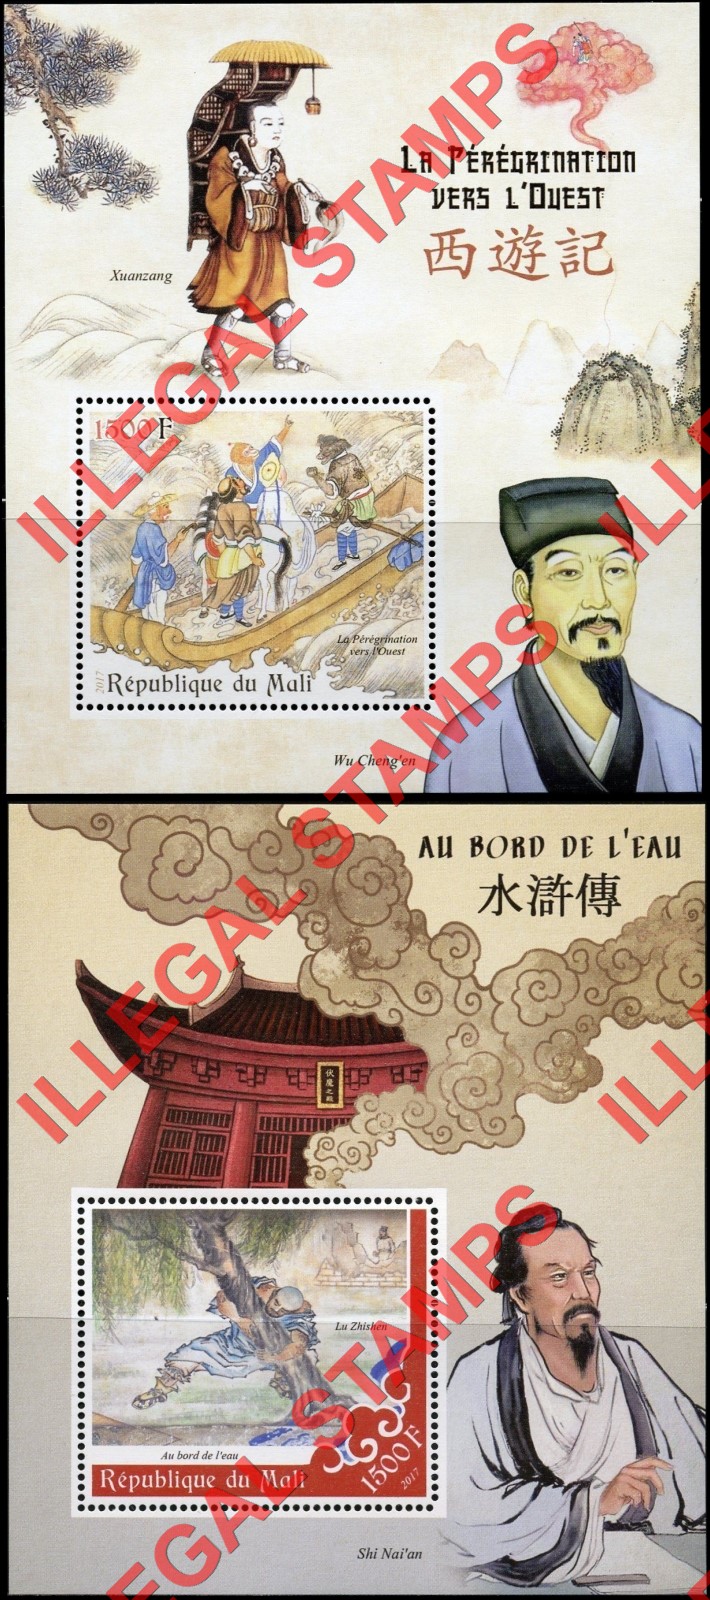 Mali 2017 Chinese Paintings Illegal Stamp Souvenir Sheets of 1 (Part 2)